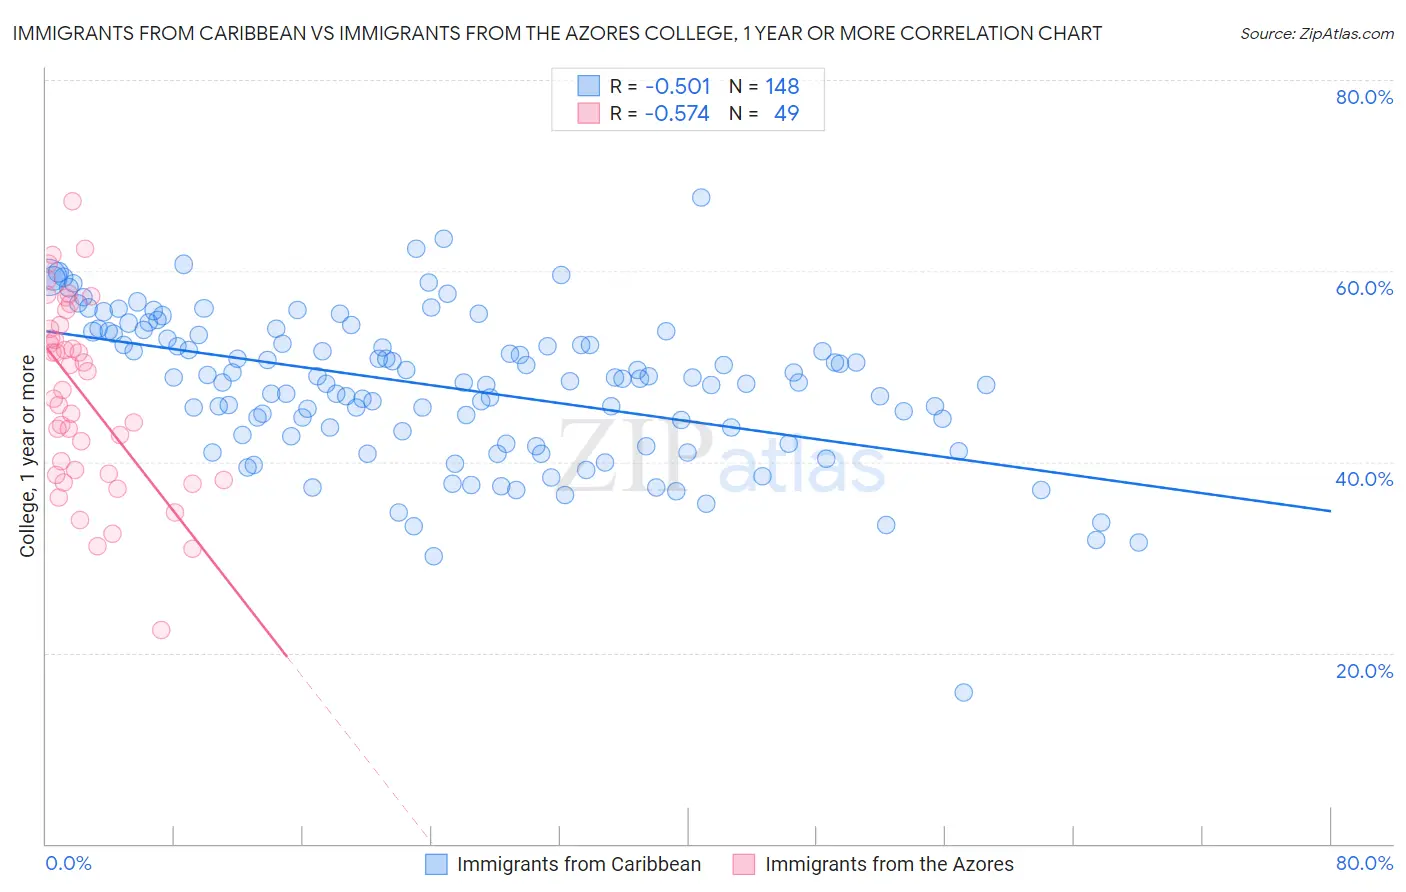 Immigrants from Caribbean vs Immigrants from the Azores College, 1 year or more